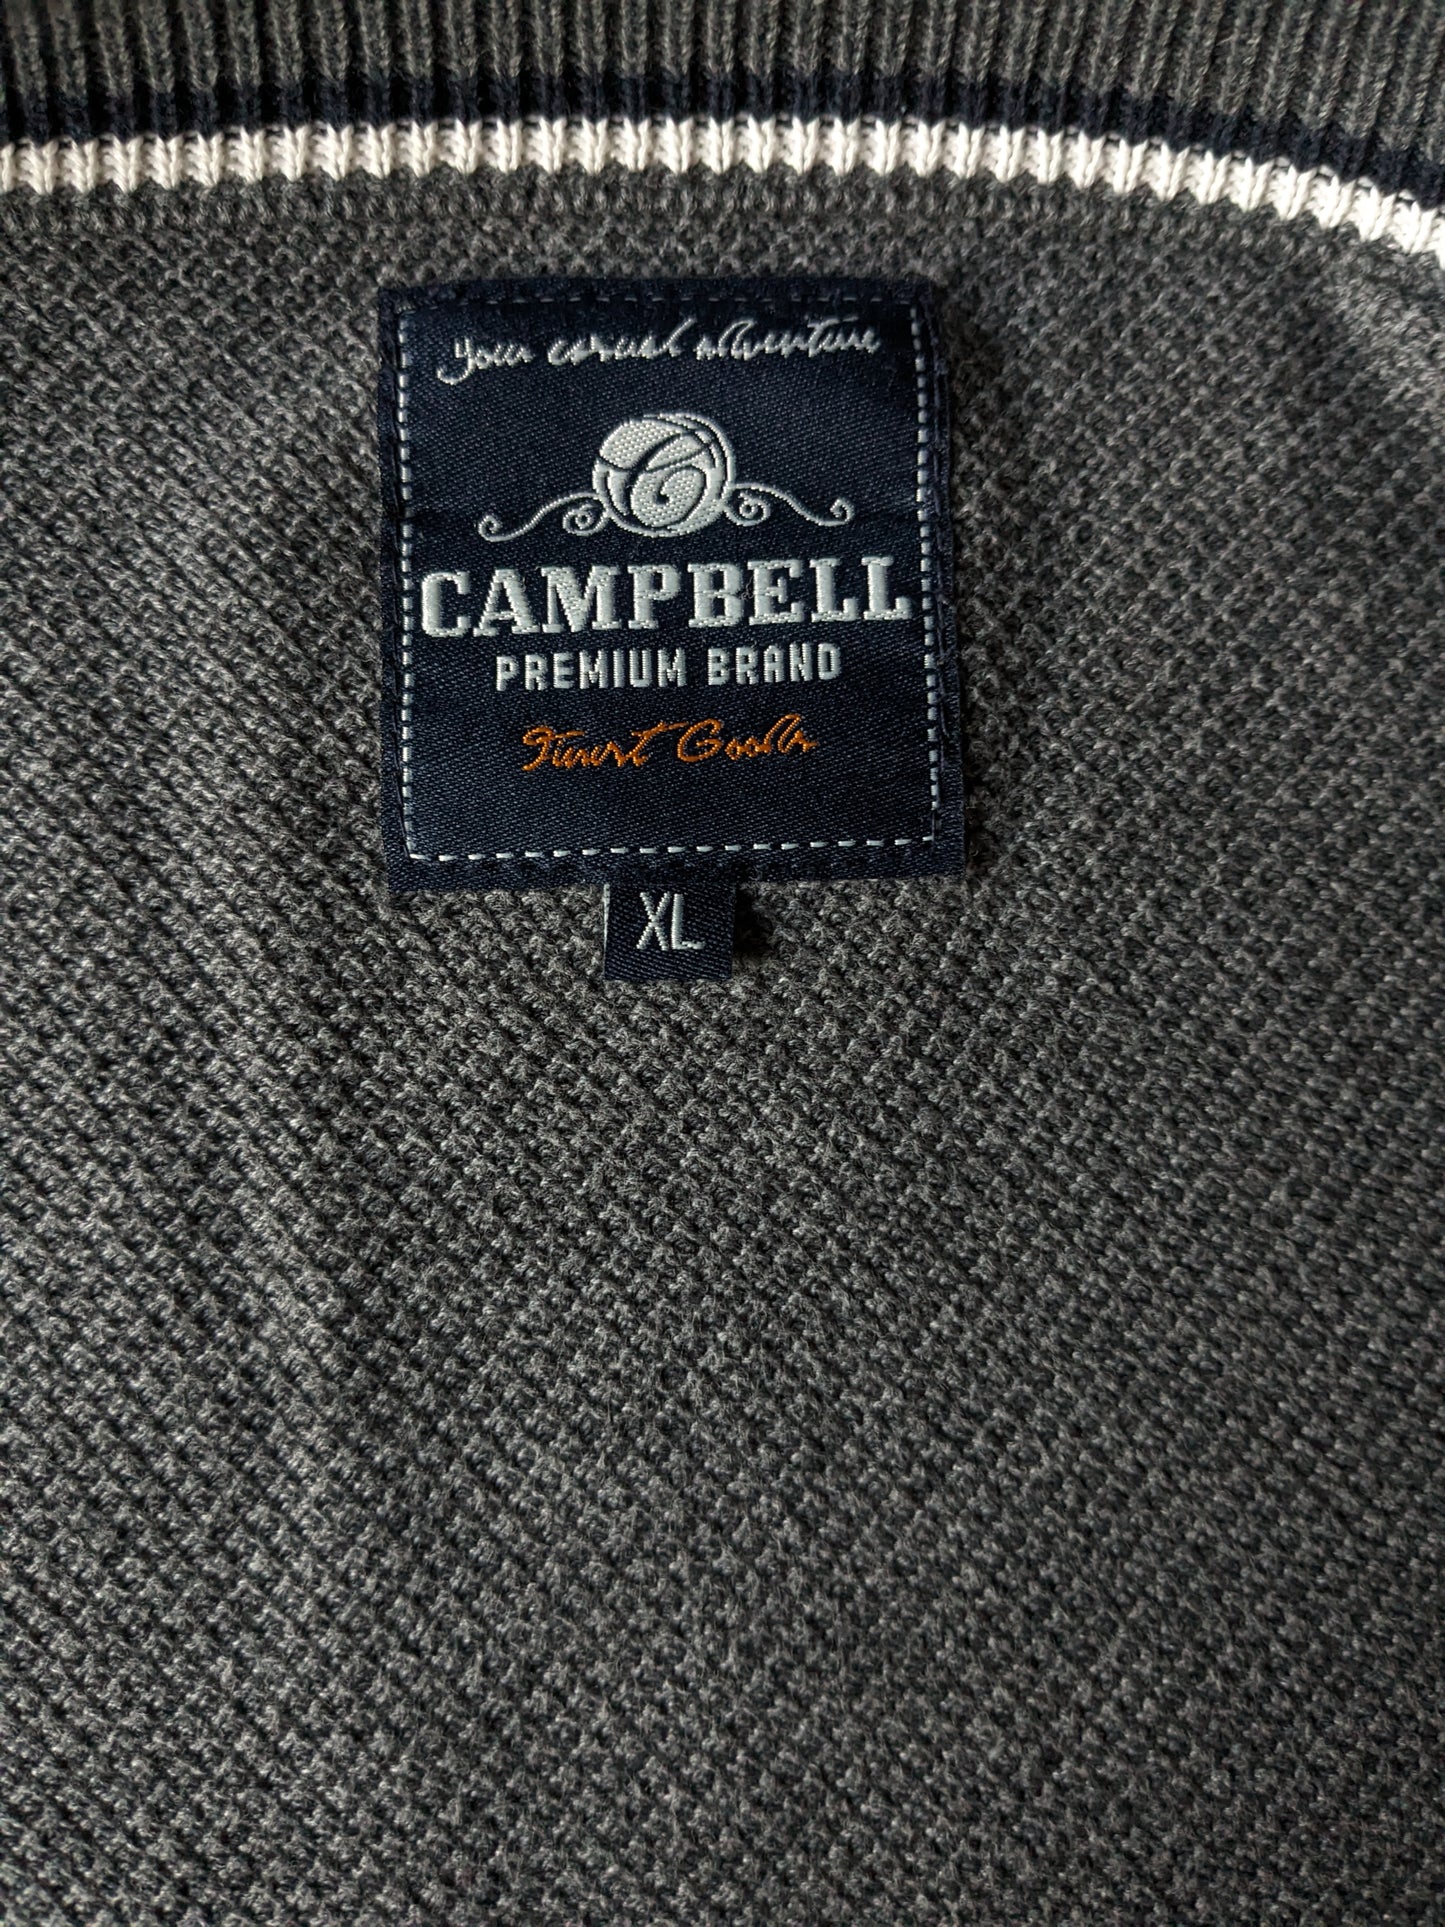 Campbell Vest. Dark gray colored. Size XL.